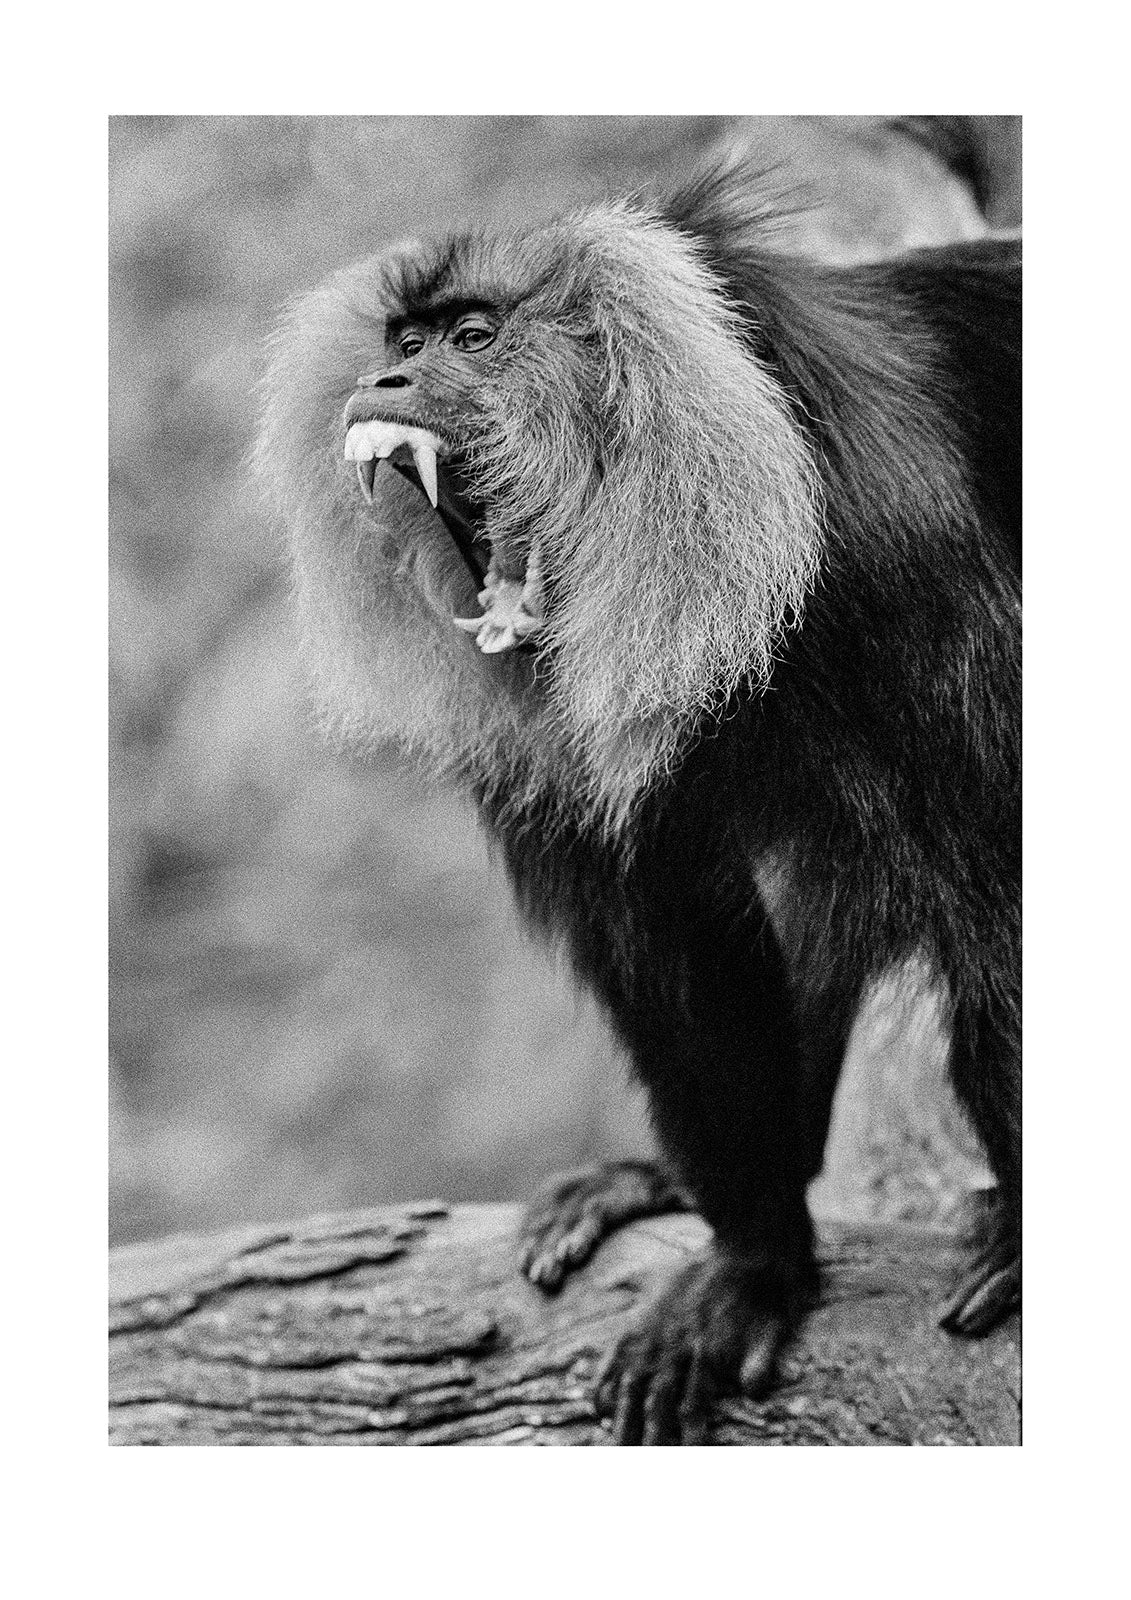 The endangered Lion-tailed Macaque from the Western Ghats in India, ranks among the rarest of Earth's primates. Captured on Ilford HP5 black and white negative film. Zoological Board of Victoria, Victoria, Australia.